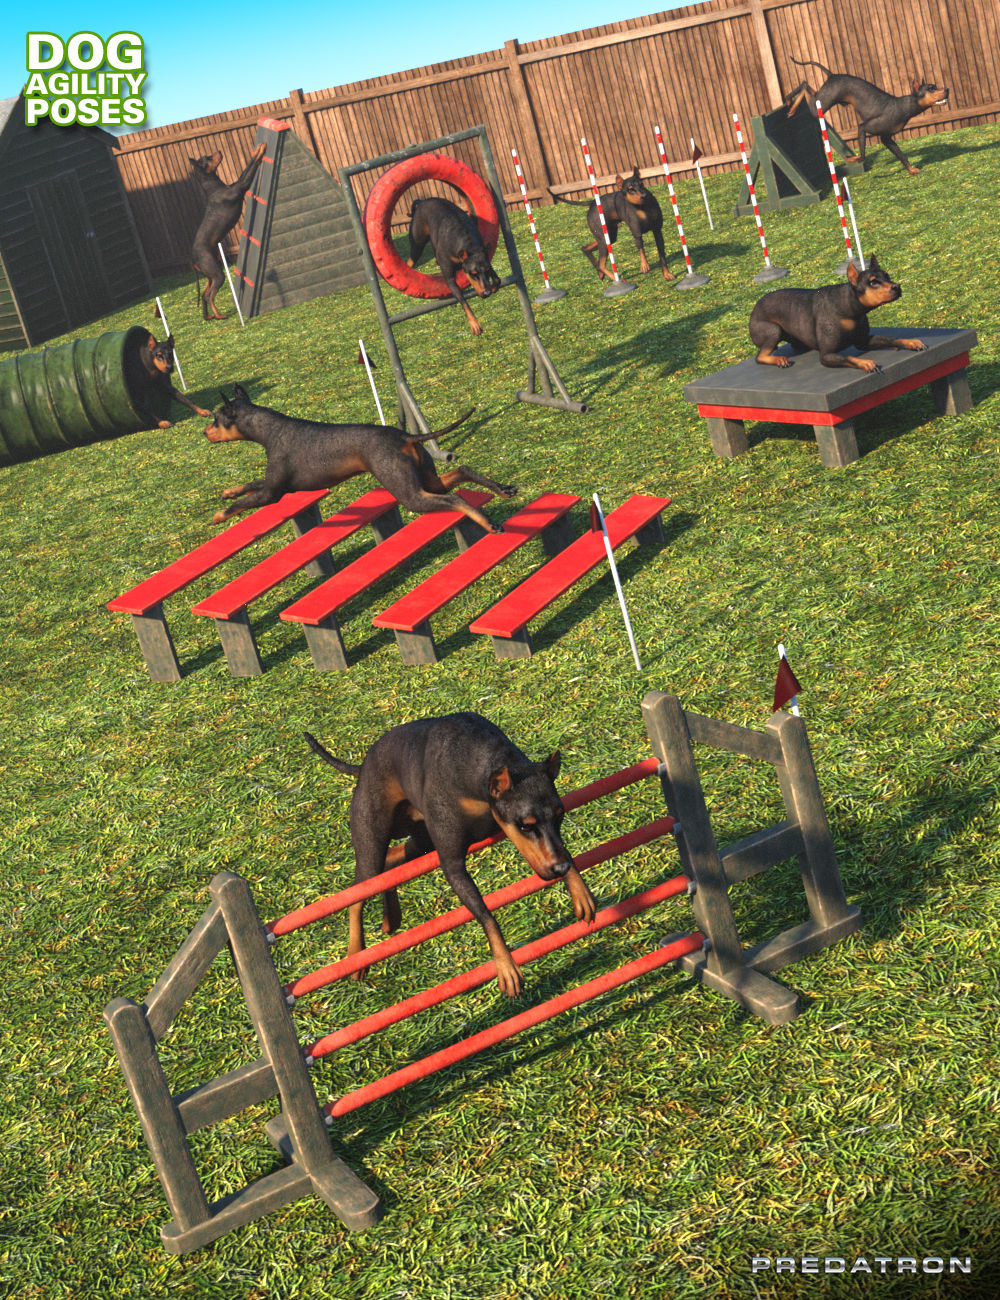 Dog Agility Course Poses by: Predatron, 3D Models by Daz 3D